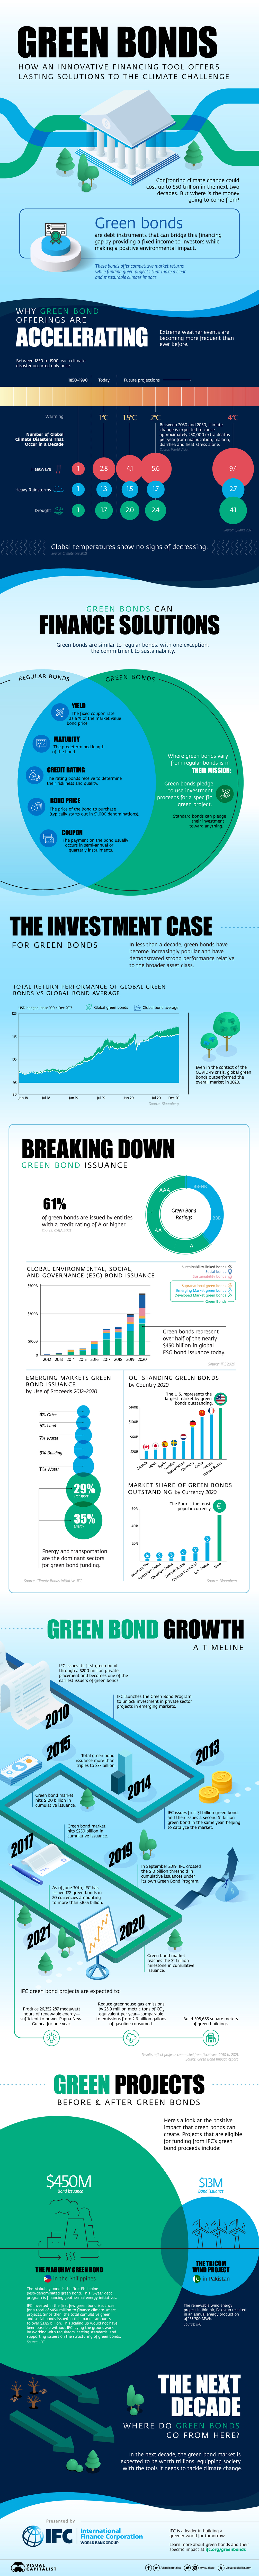 Green Bonds: Lasting Solutions For Climate Change